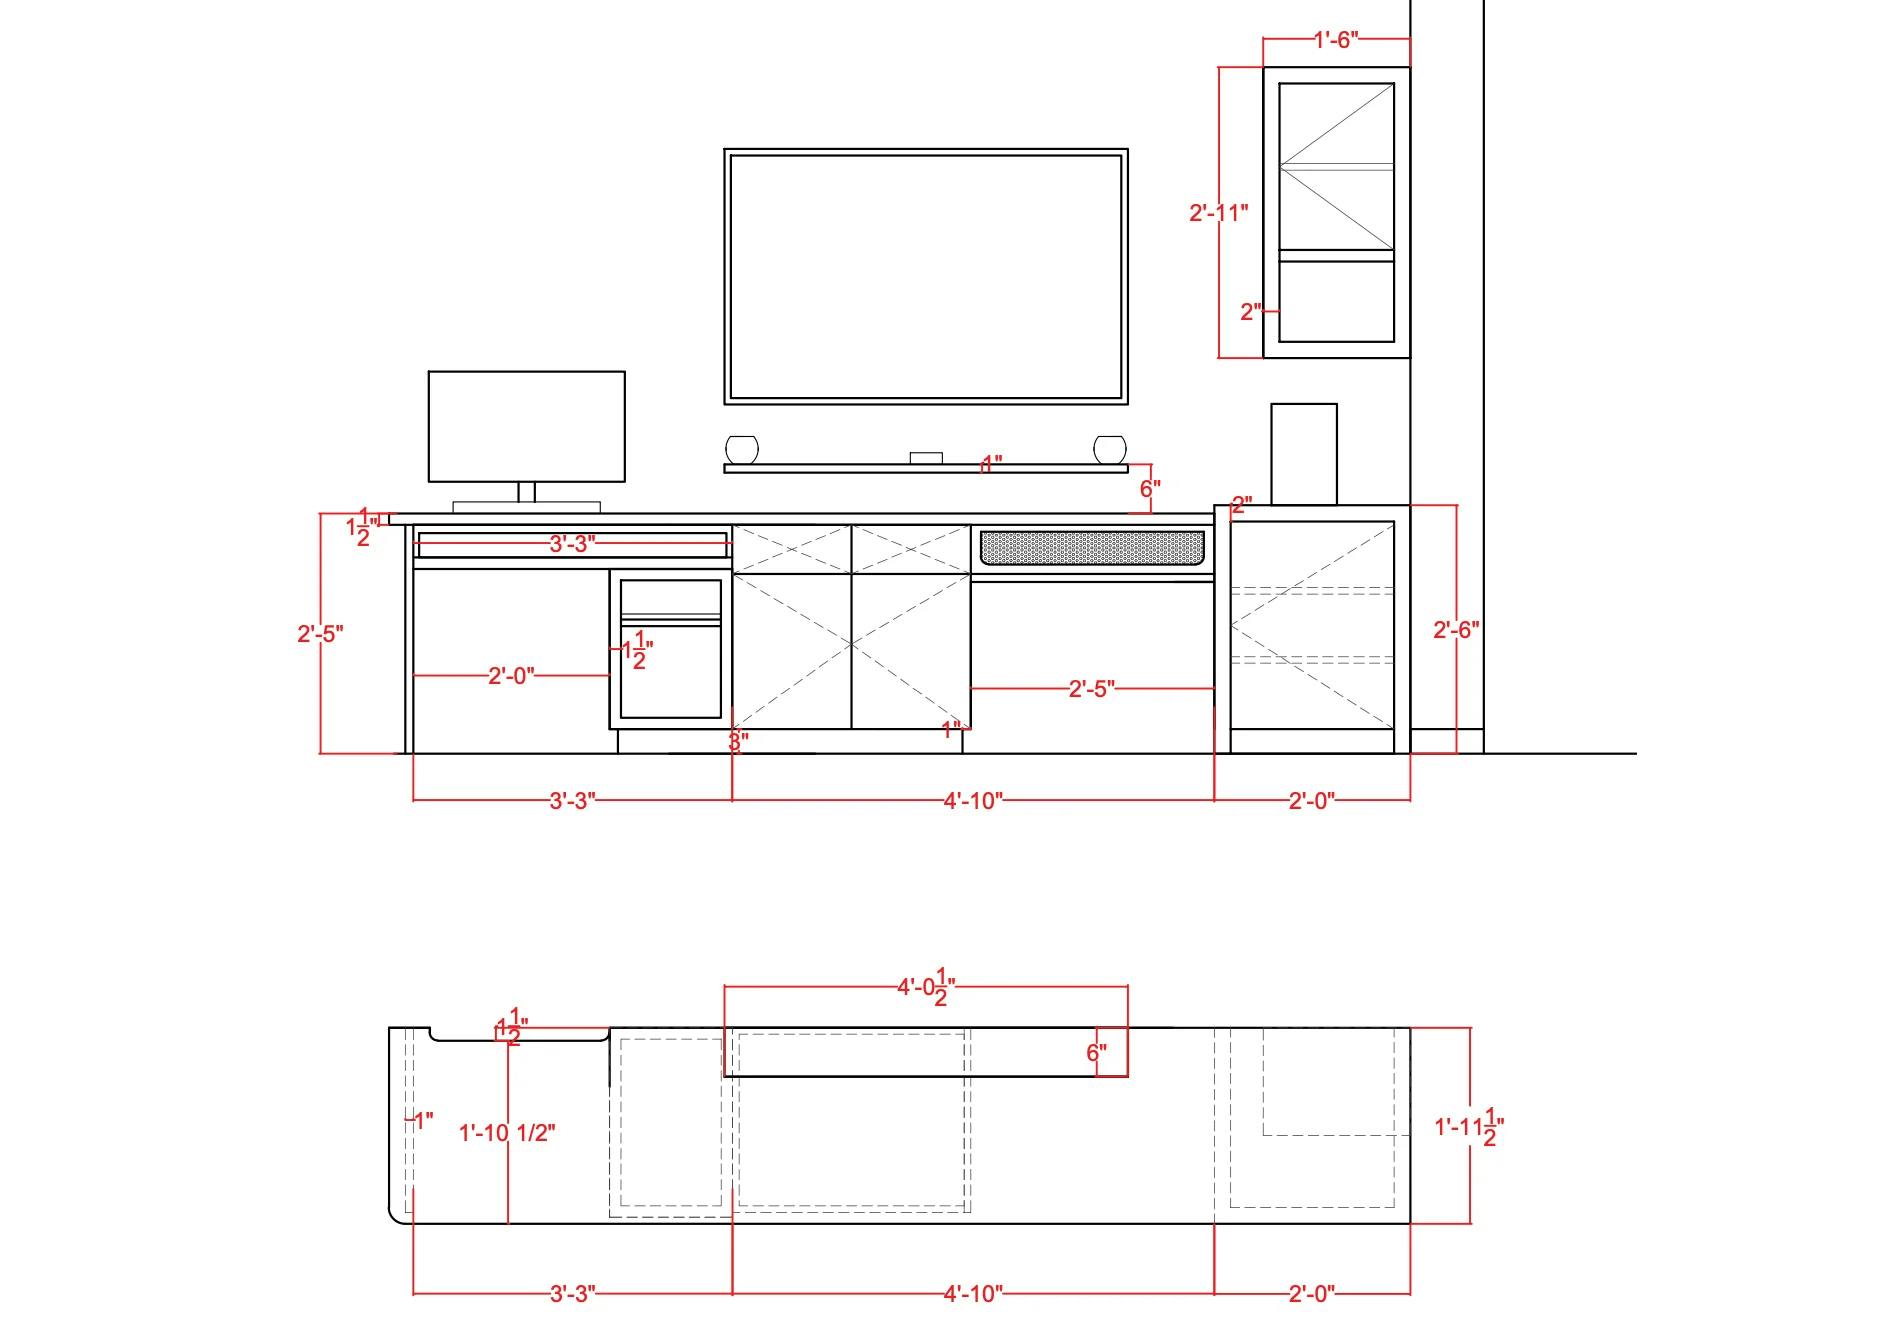 A screenshot of the schematic for a work desk.